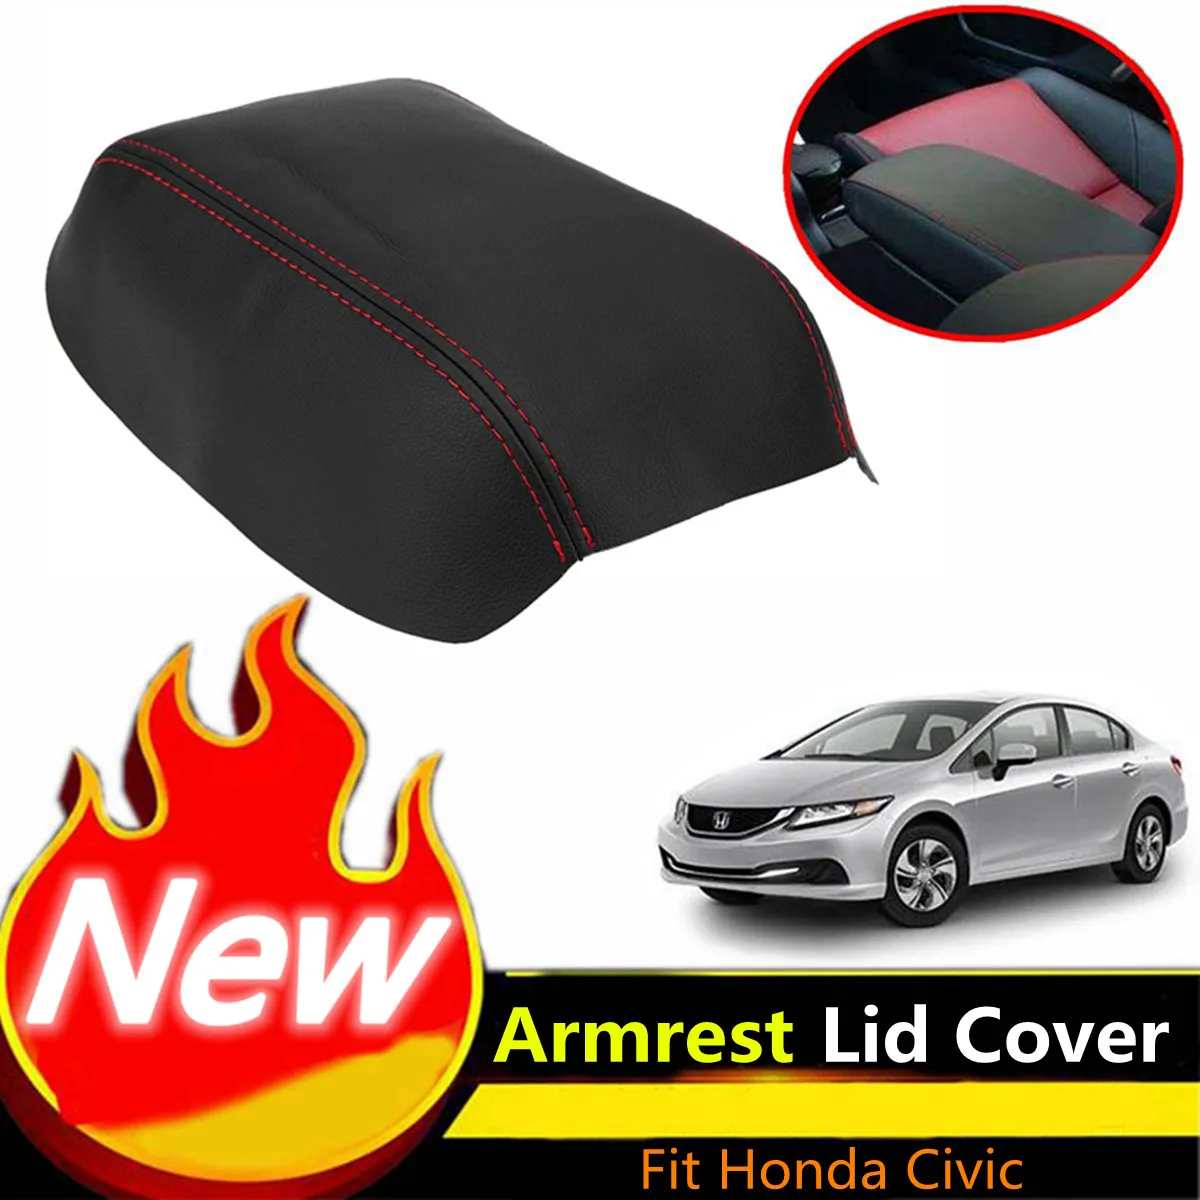 

PU Leather Car Center Console Armrest Cover Auto Arm Rest Box Pad Lid Cover Protection for Honda/Civic 2012 2013 2014